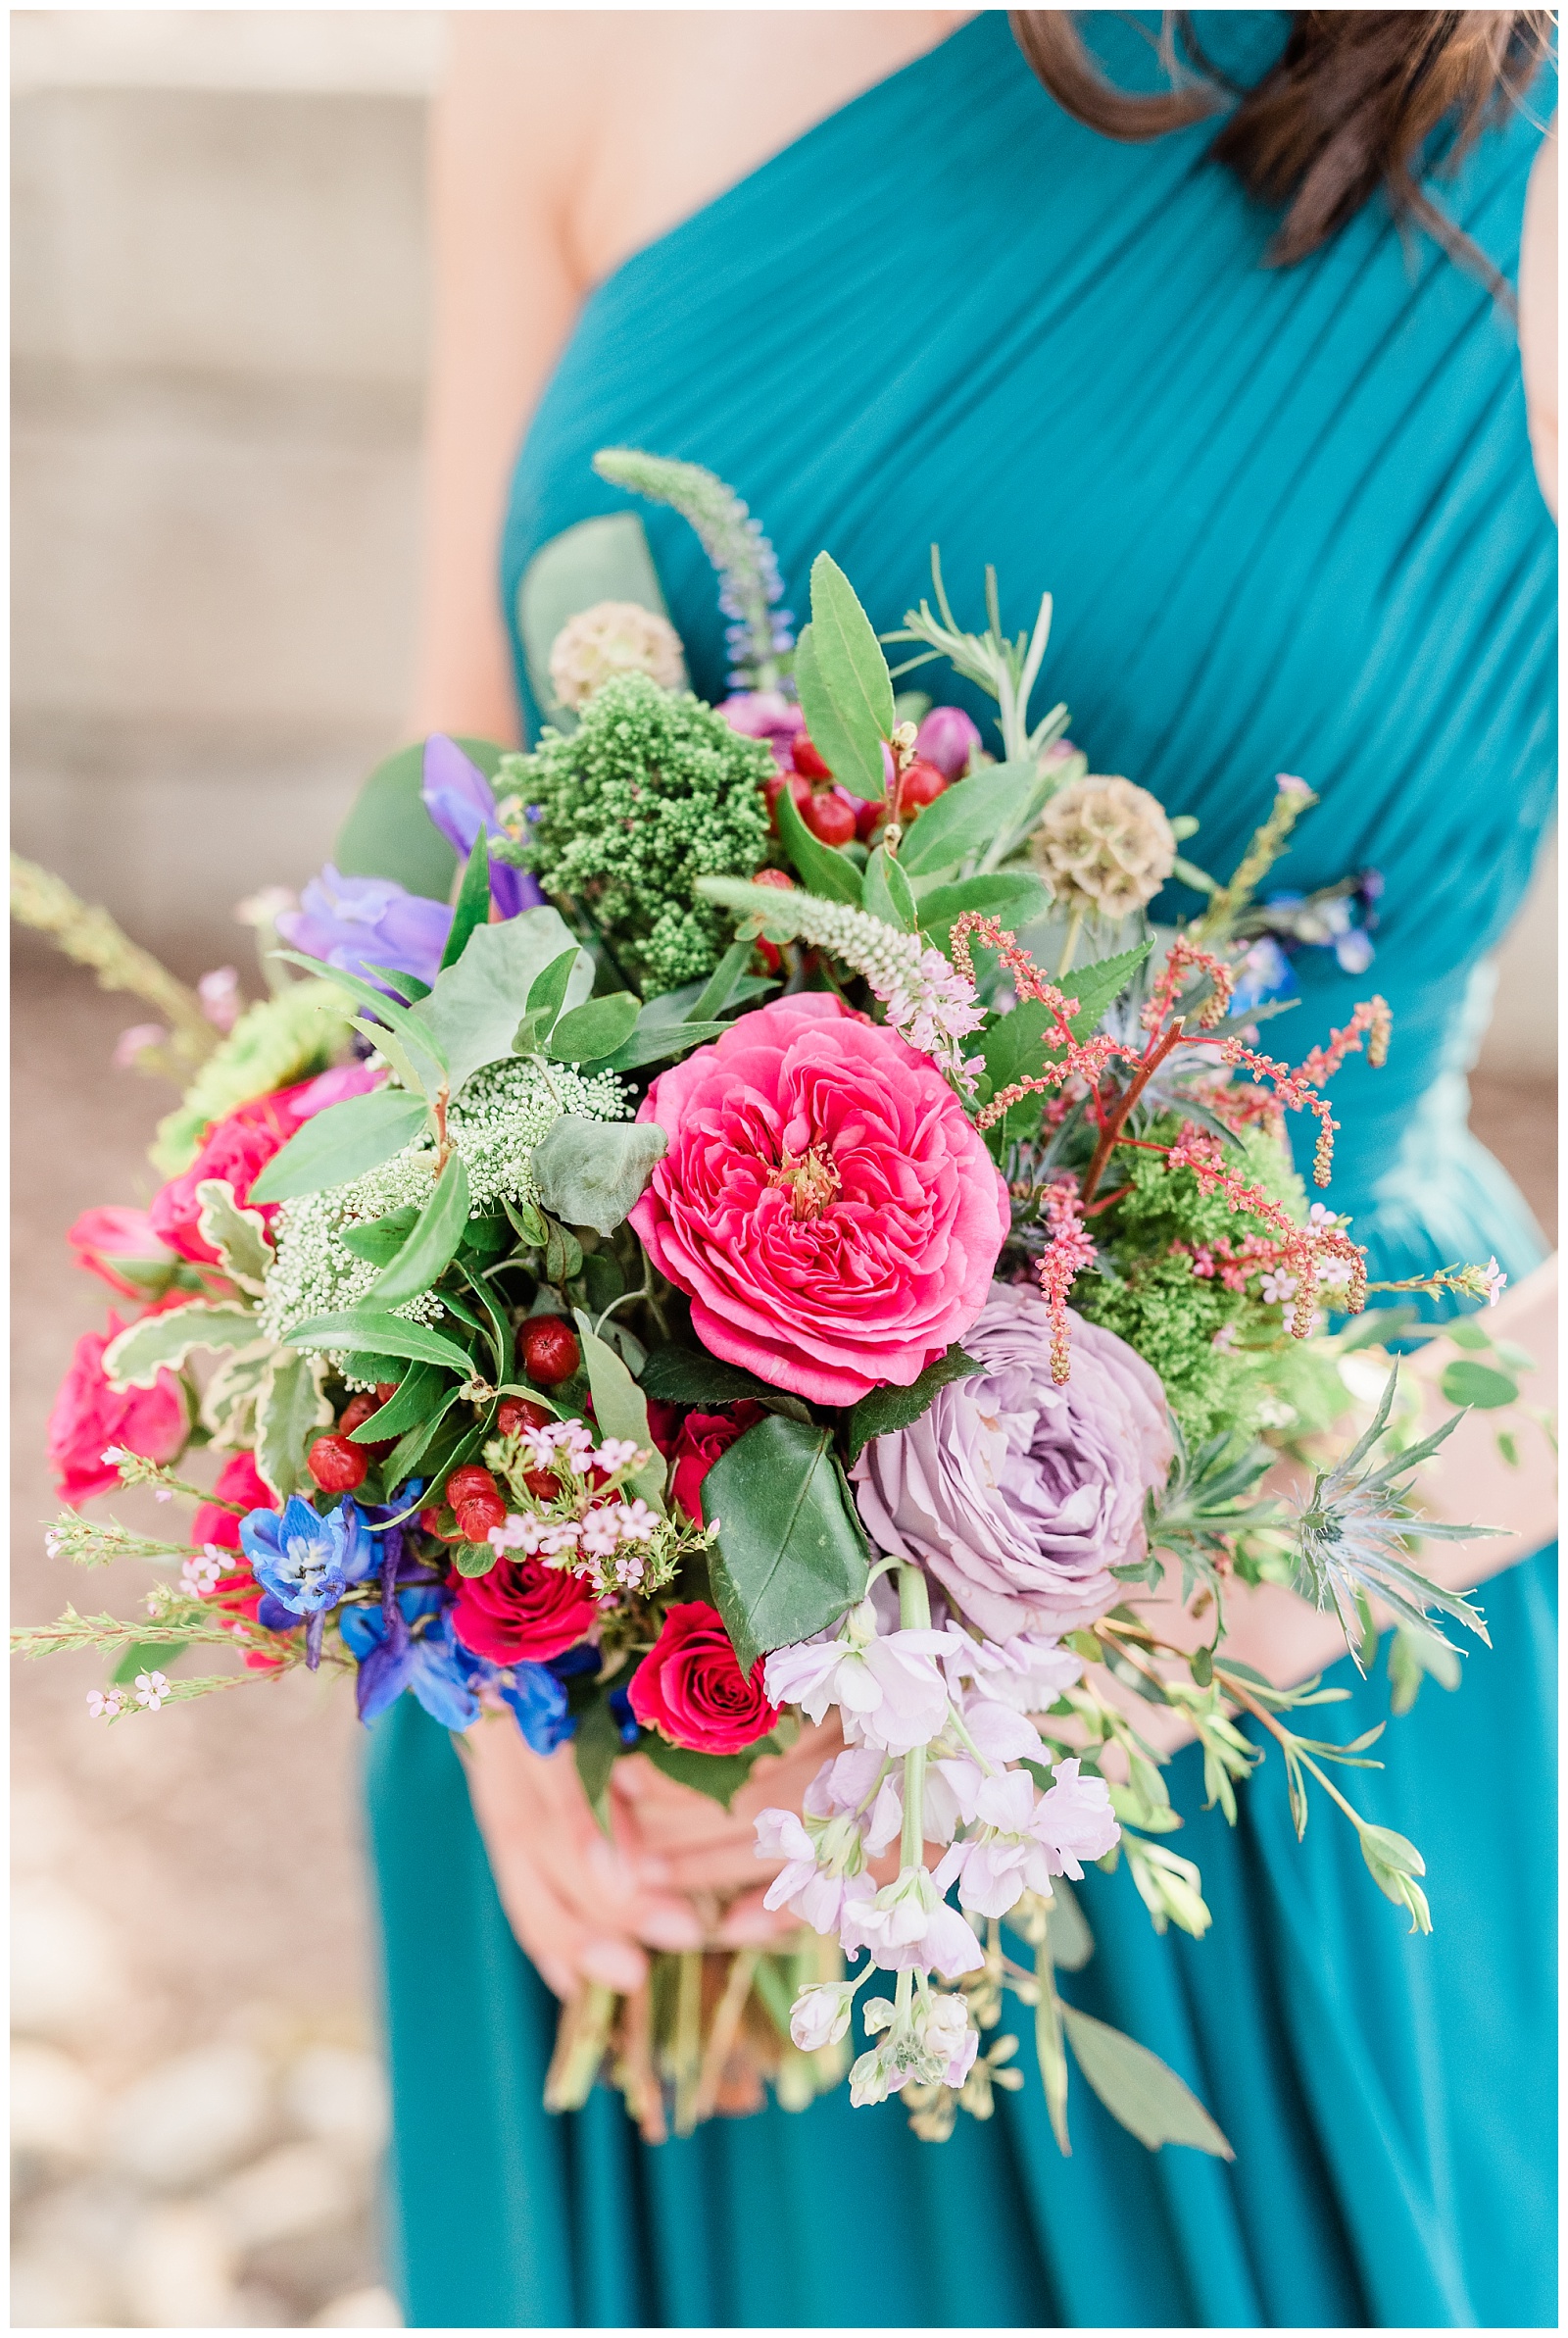 Bright colorful bridesmaid bouquet with teal dress by Buttercup Florals in Pennsylvania.